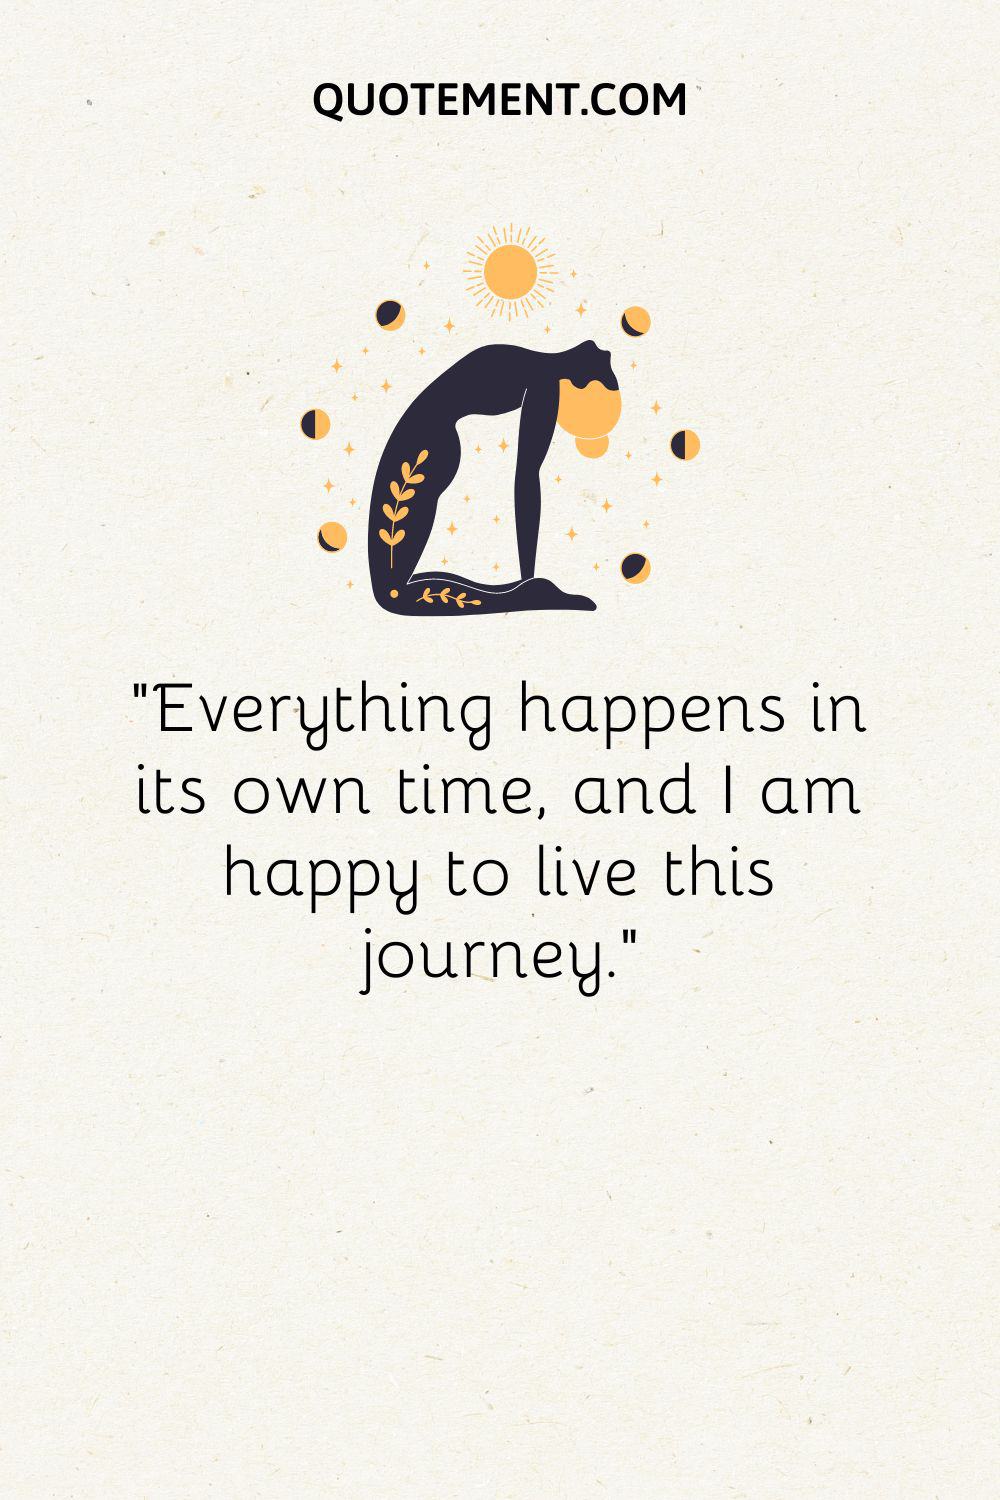 Everything happens in its own time, and I am happy to live this journey